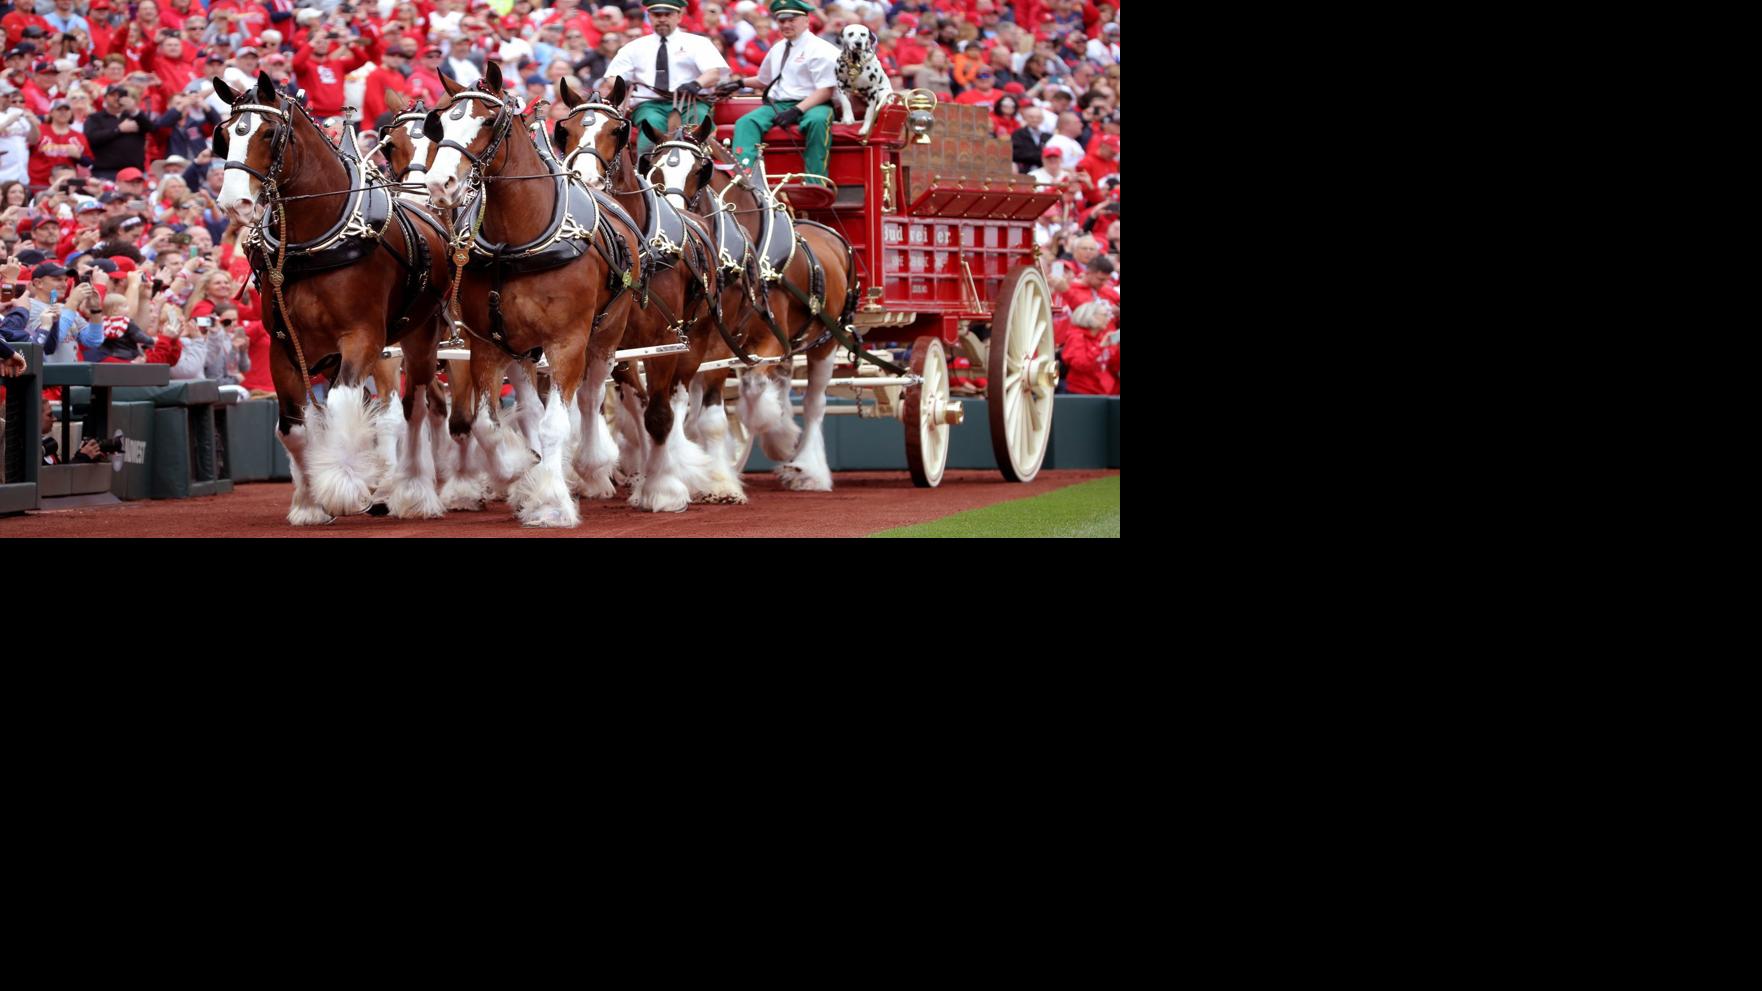 Scenes from 2019 Cardinals opening day | St. Louis Cardinals | www.semadata.org